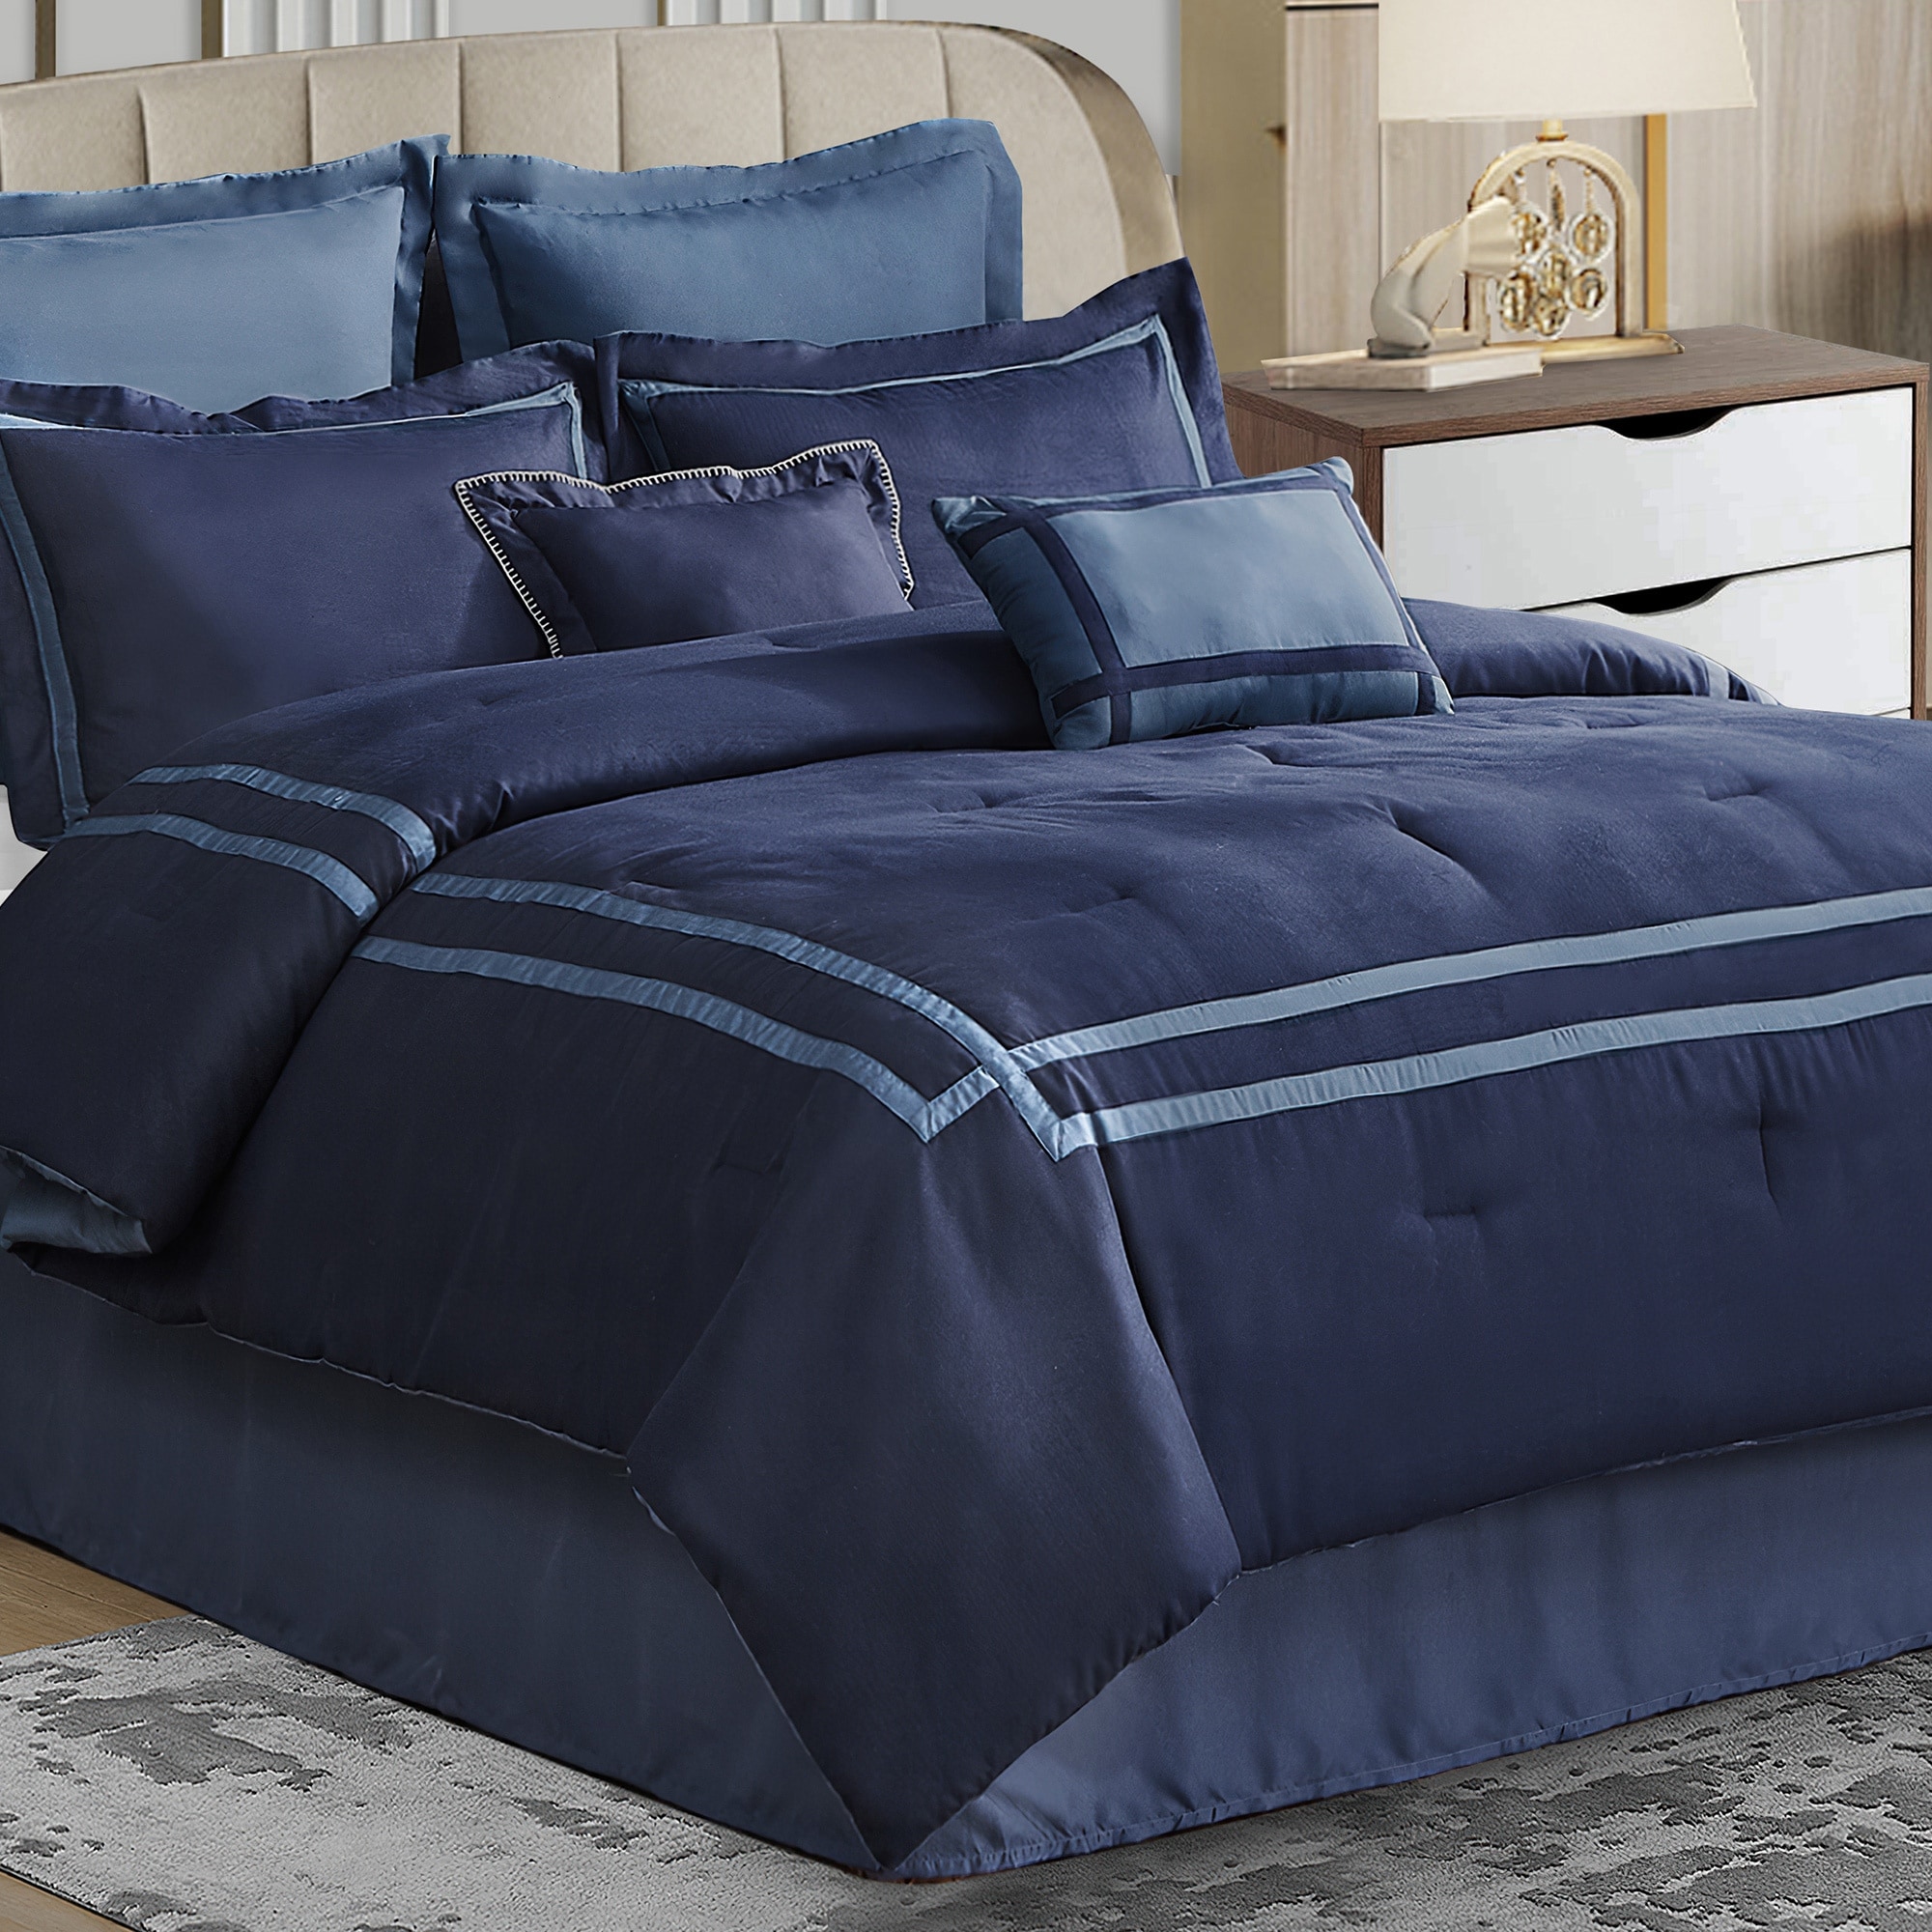 https://ak1.ostkcdn.com/images/products/is/images/direct/aa66deb0cfd127ee04a3fec9e079172e0d4cf87f/Beaute-Living-Hotel-Collection-8-Piece-Comforter-Set.jpg